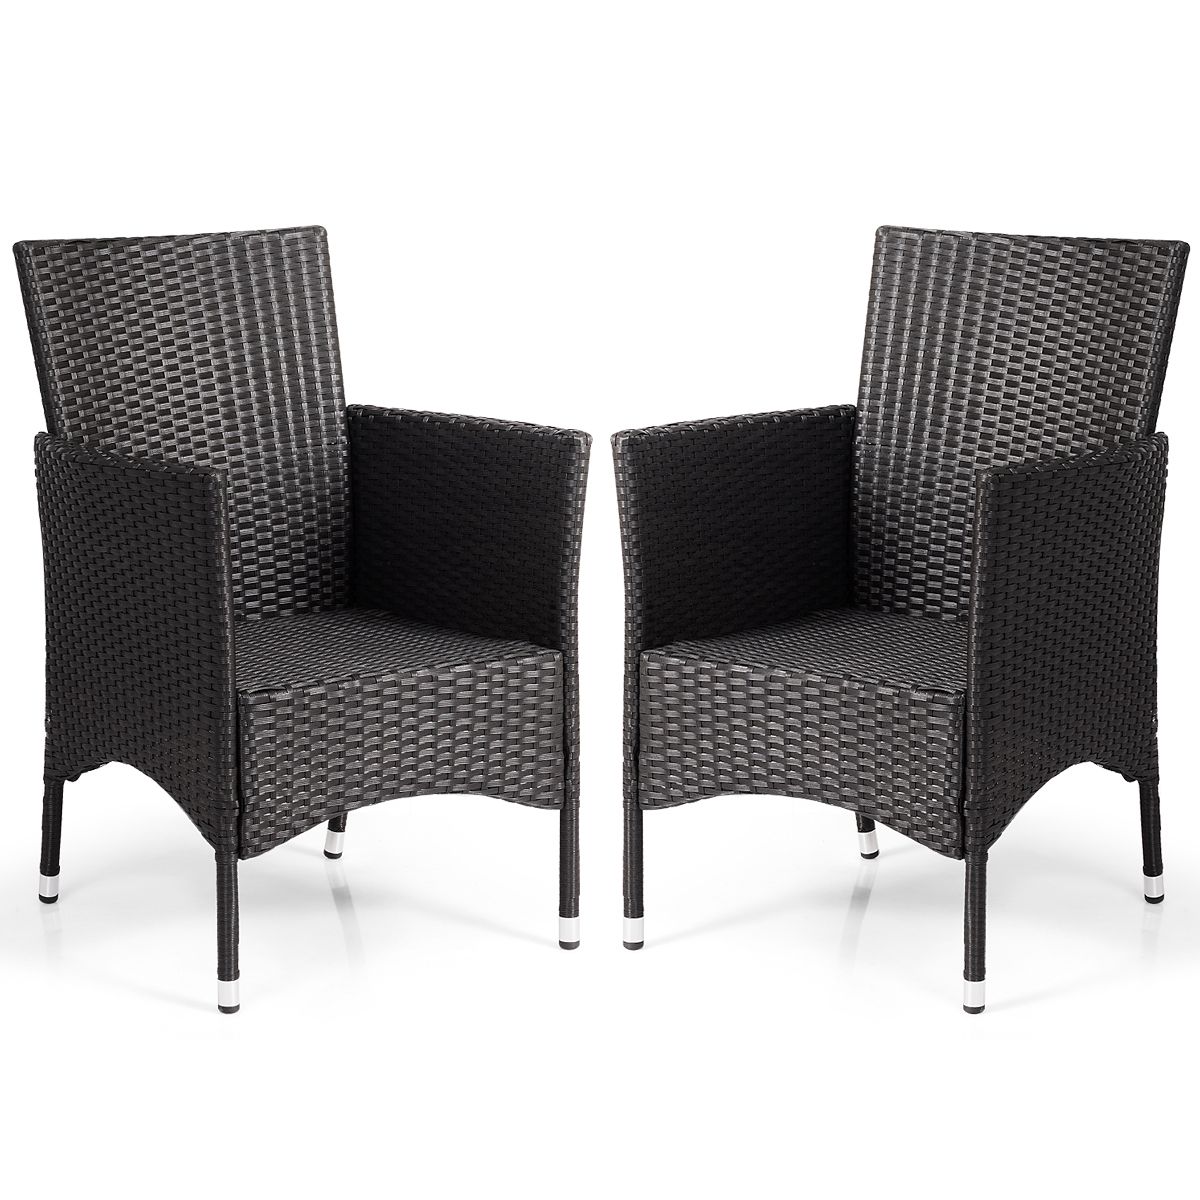 Black Outdoor Dining Chairs With Regard To Well Known Giantex 2pc Patio Rattan Wicker Dining Chairs Set With Cushions Black (View 9 of 15)